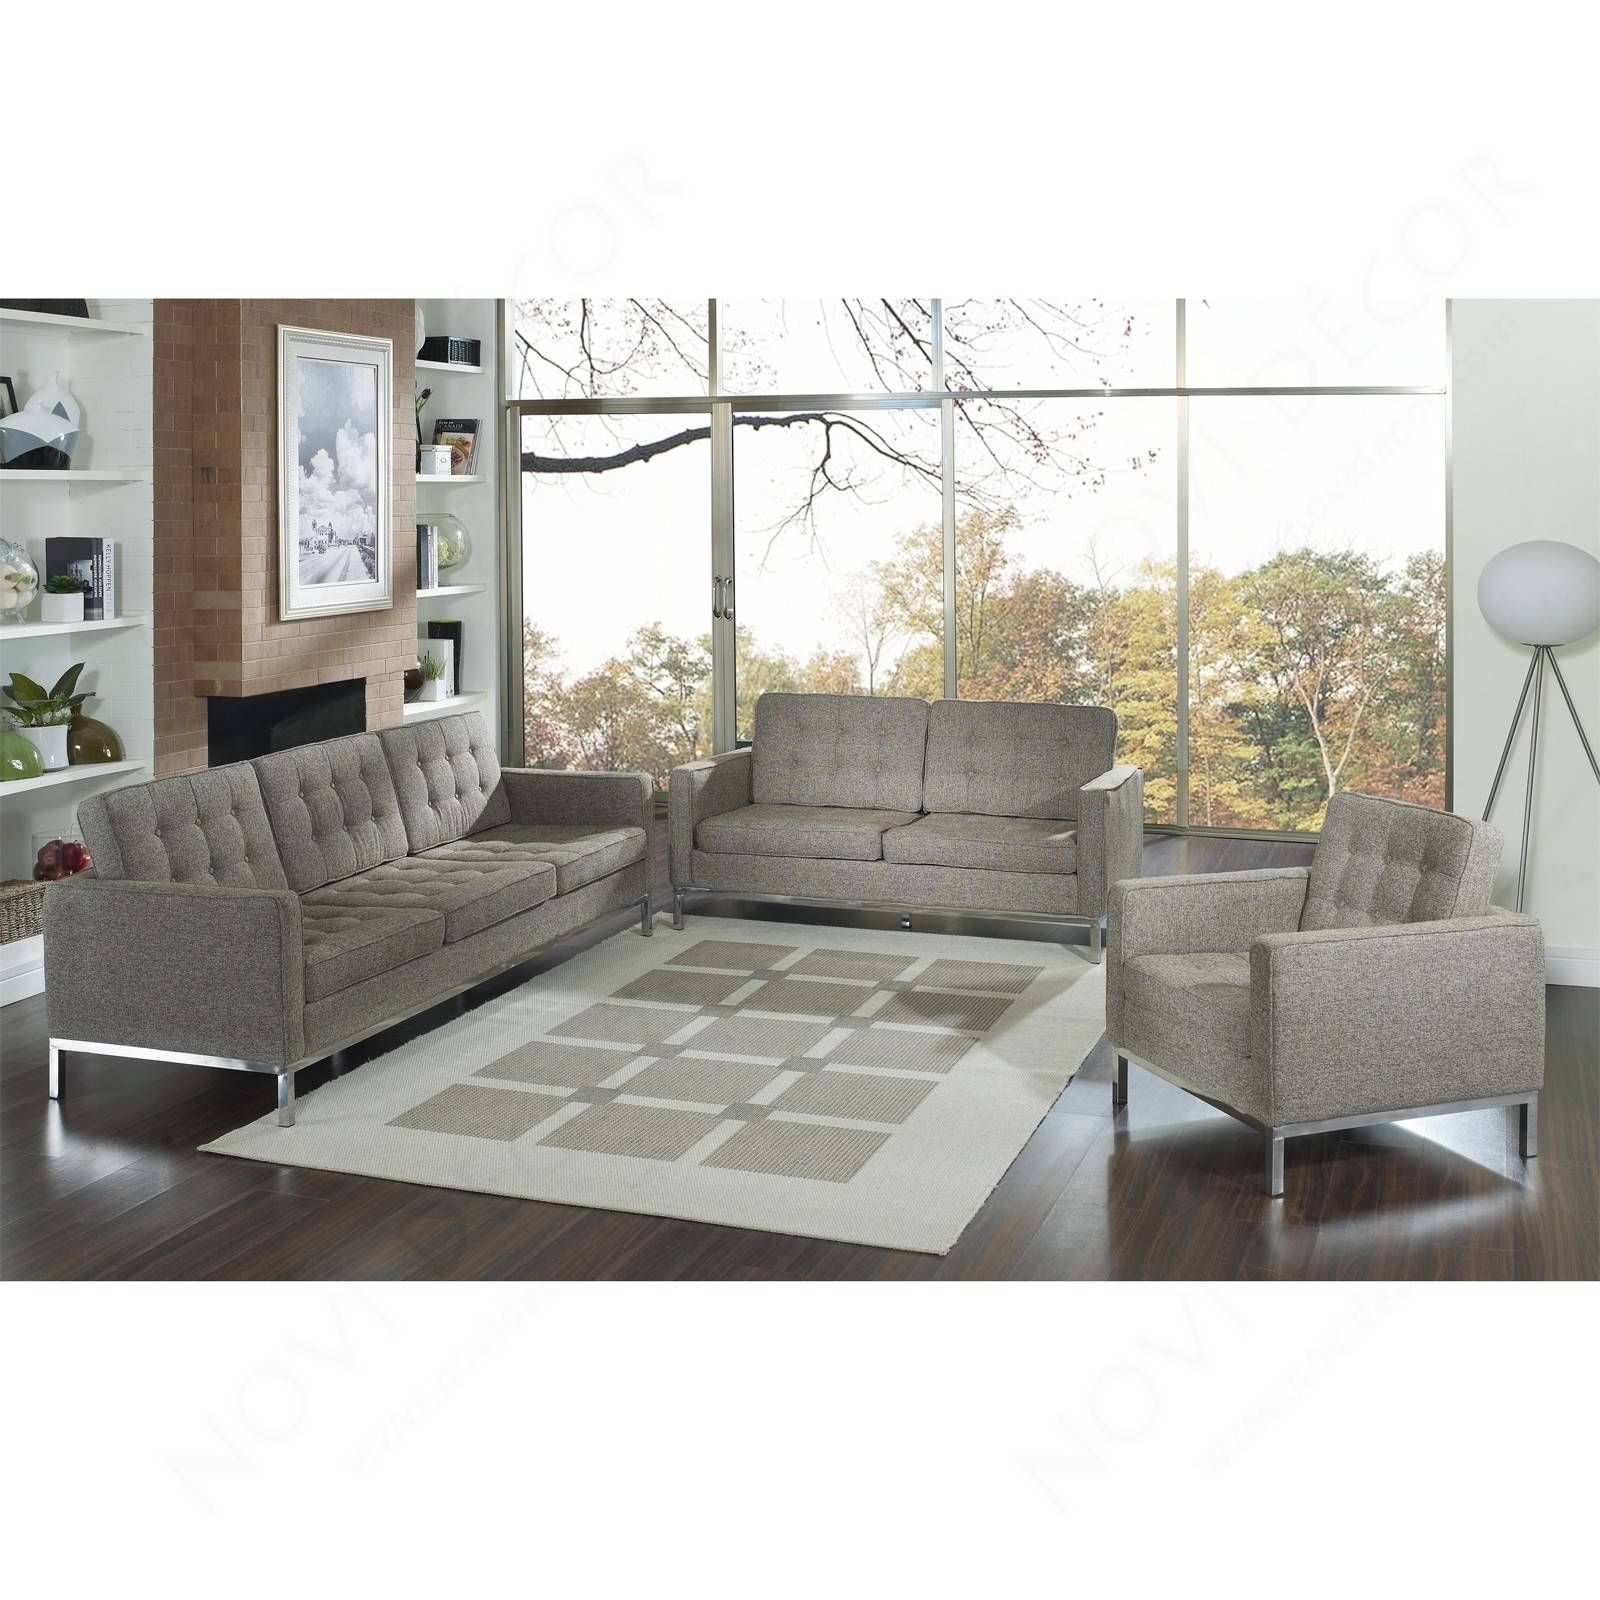 Florence Style Sofa In Wool (multiple Colors) | Designer Reproduction Inside Florence Sofas And Loveseats (View 8 of 25)